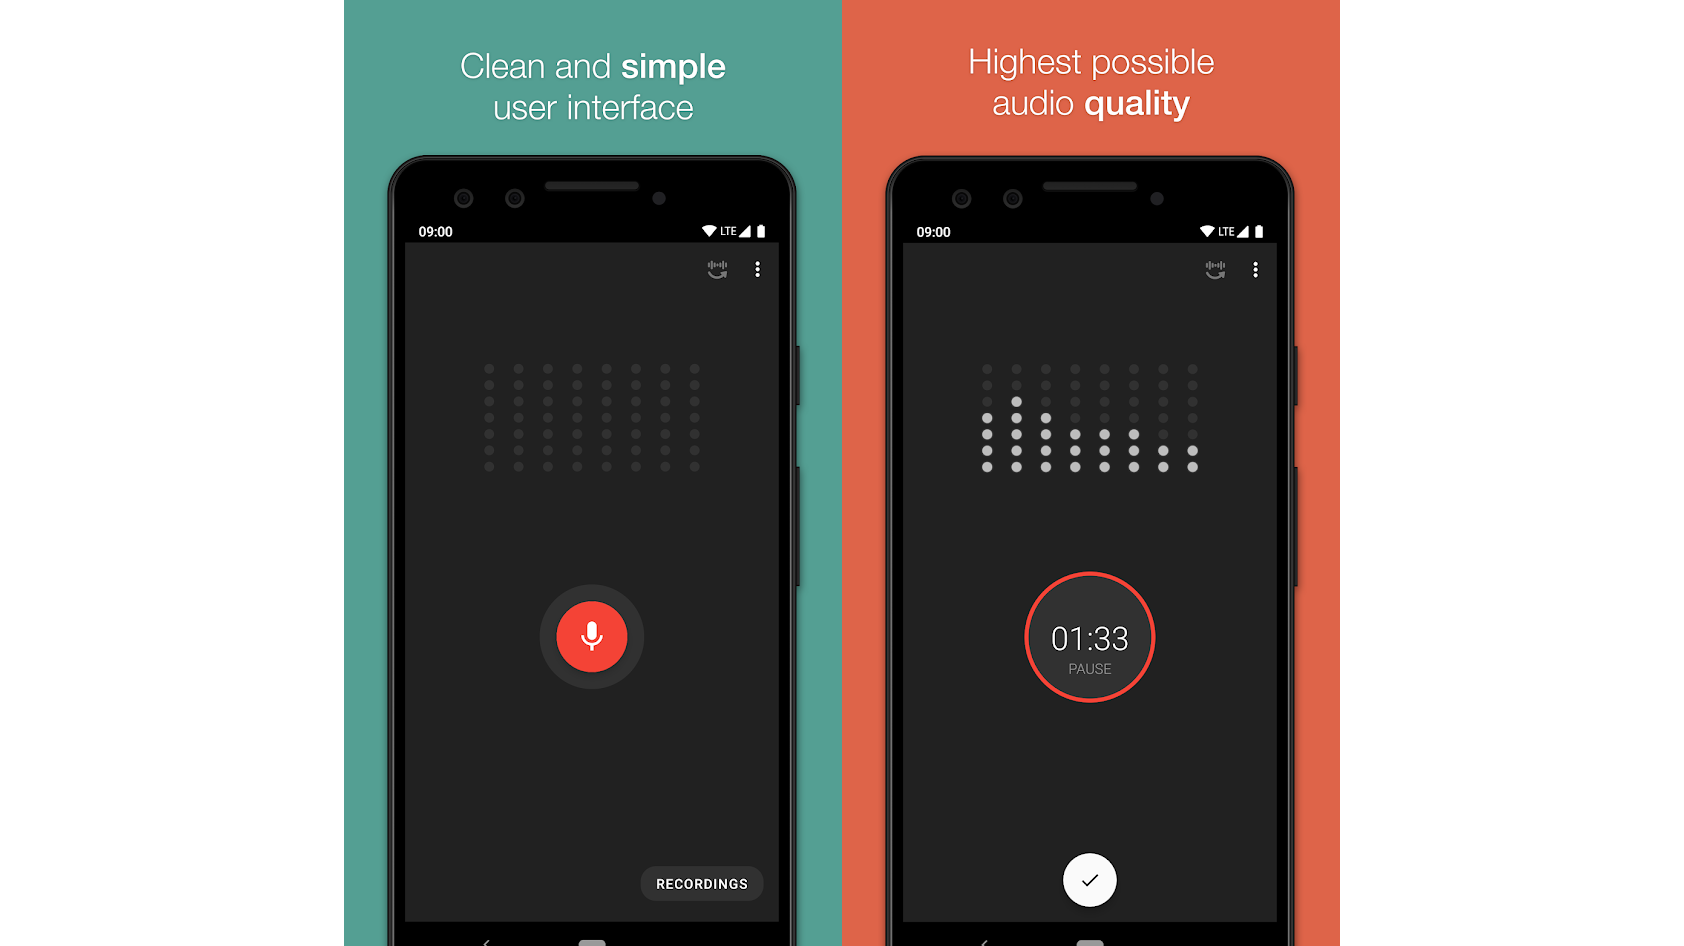 The Smart Recorder App interface depicting animated levels and a record button on a smartphone screen.